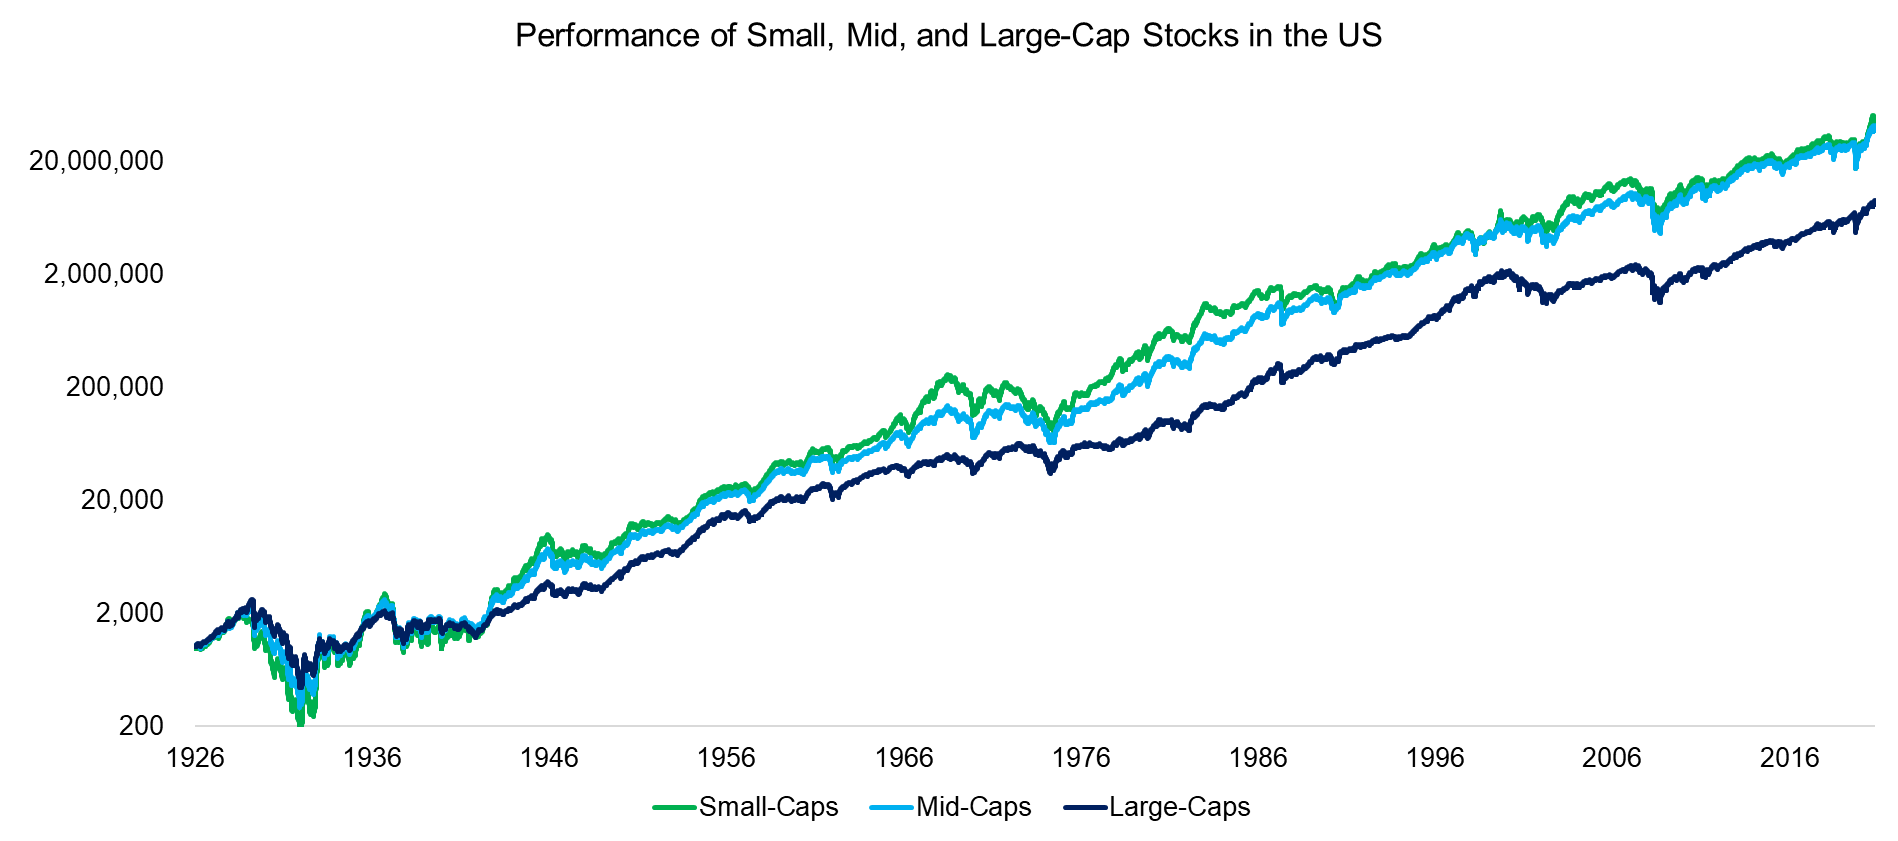 Performance of Small, Mid, and Large-Cap Stocks in the US